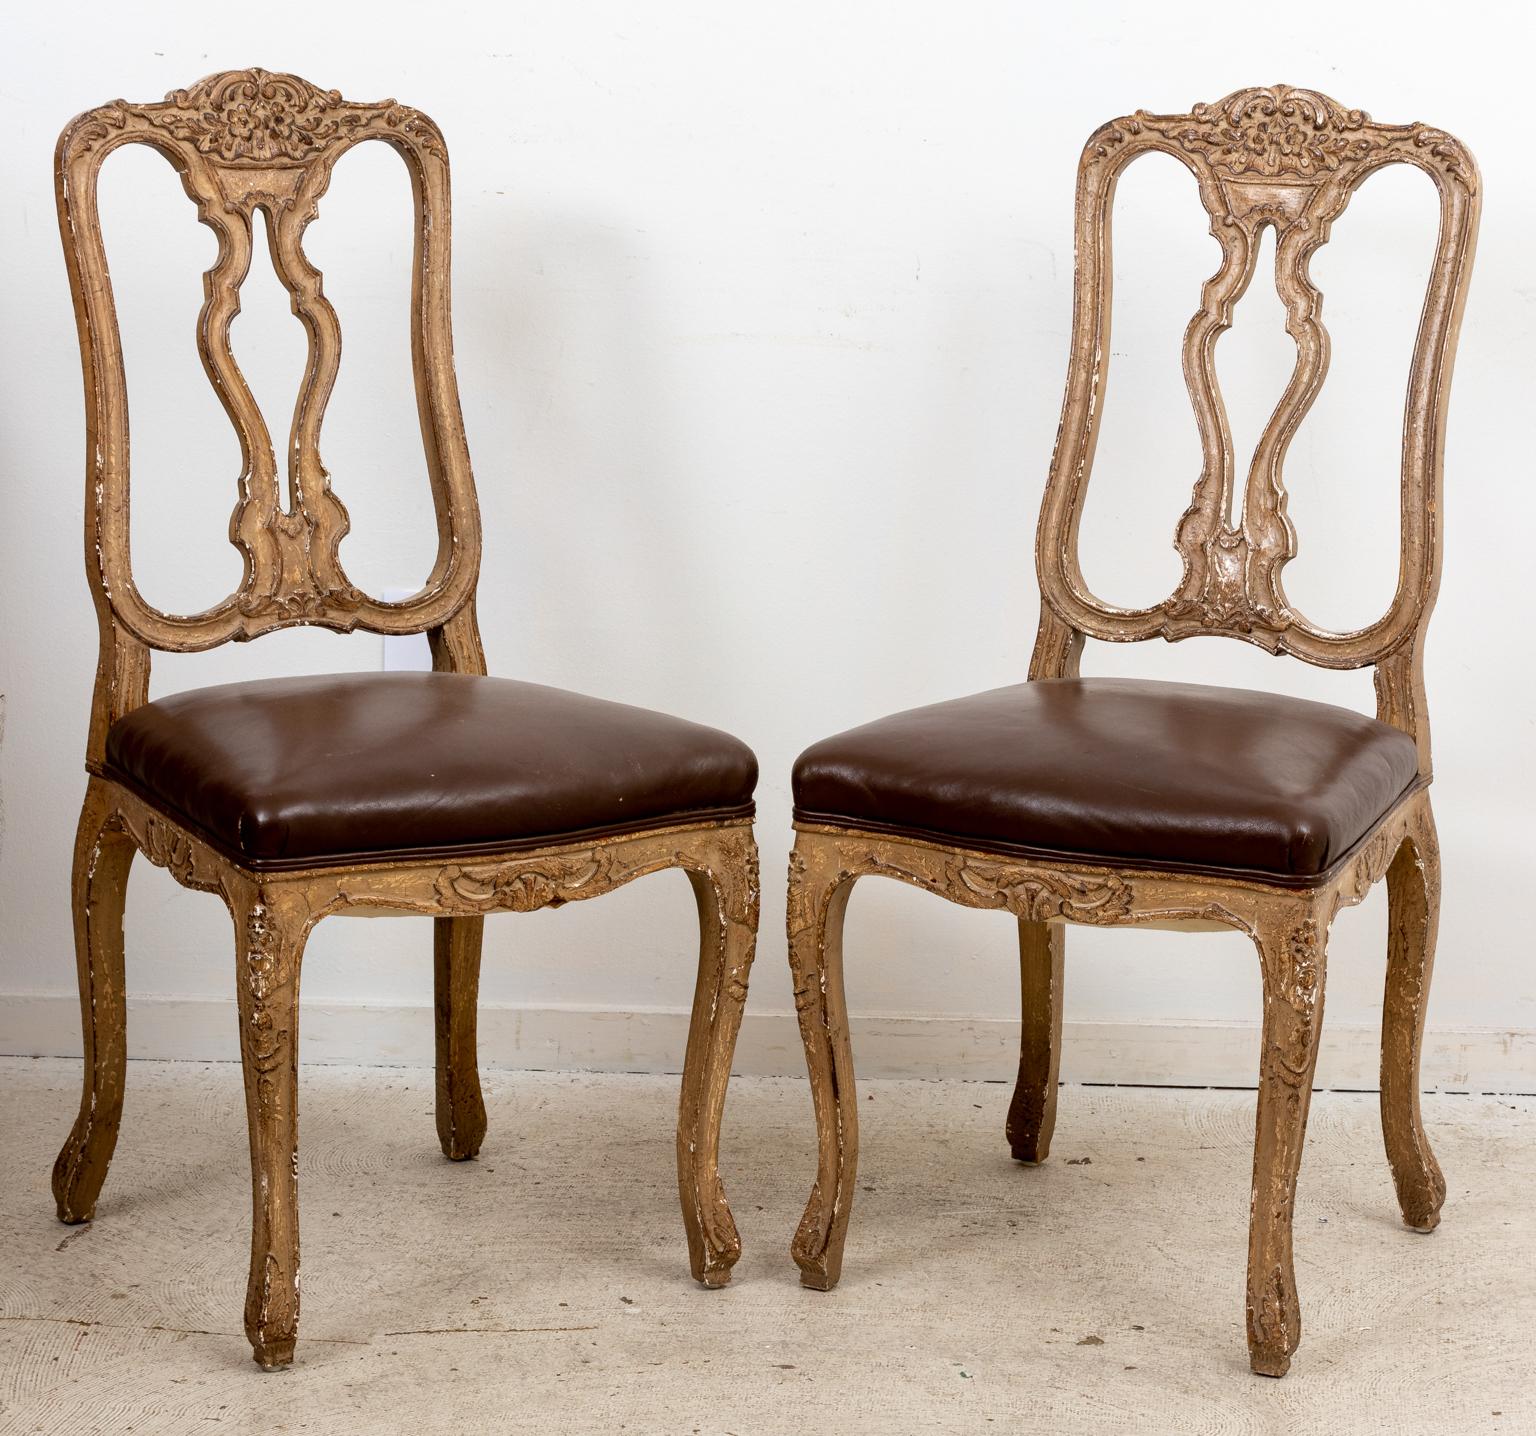 Set of six carved Italian Provincial style side chairs with leather upholstered seats on cabriole legs. The chairs feature a pierced back splat and a carved top rail with floral motifs. Further detail includes scrolled foliage accented on the bottom